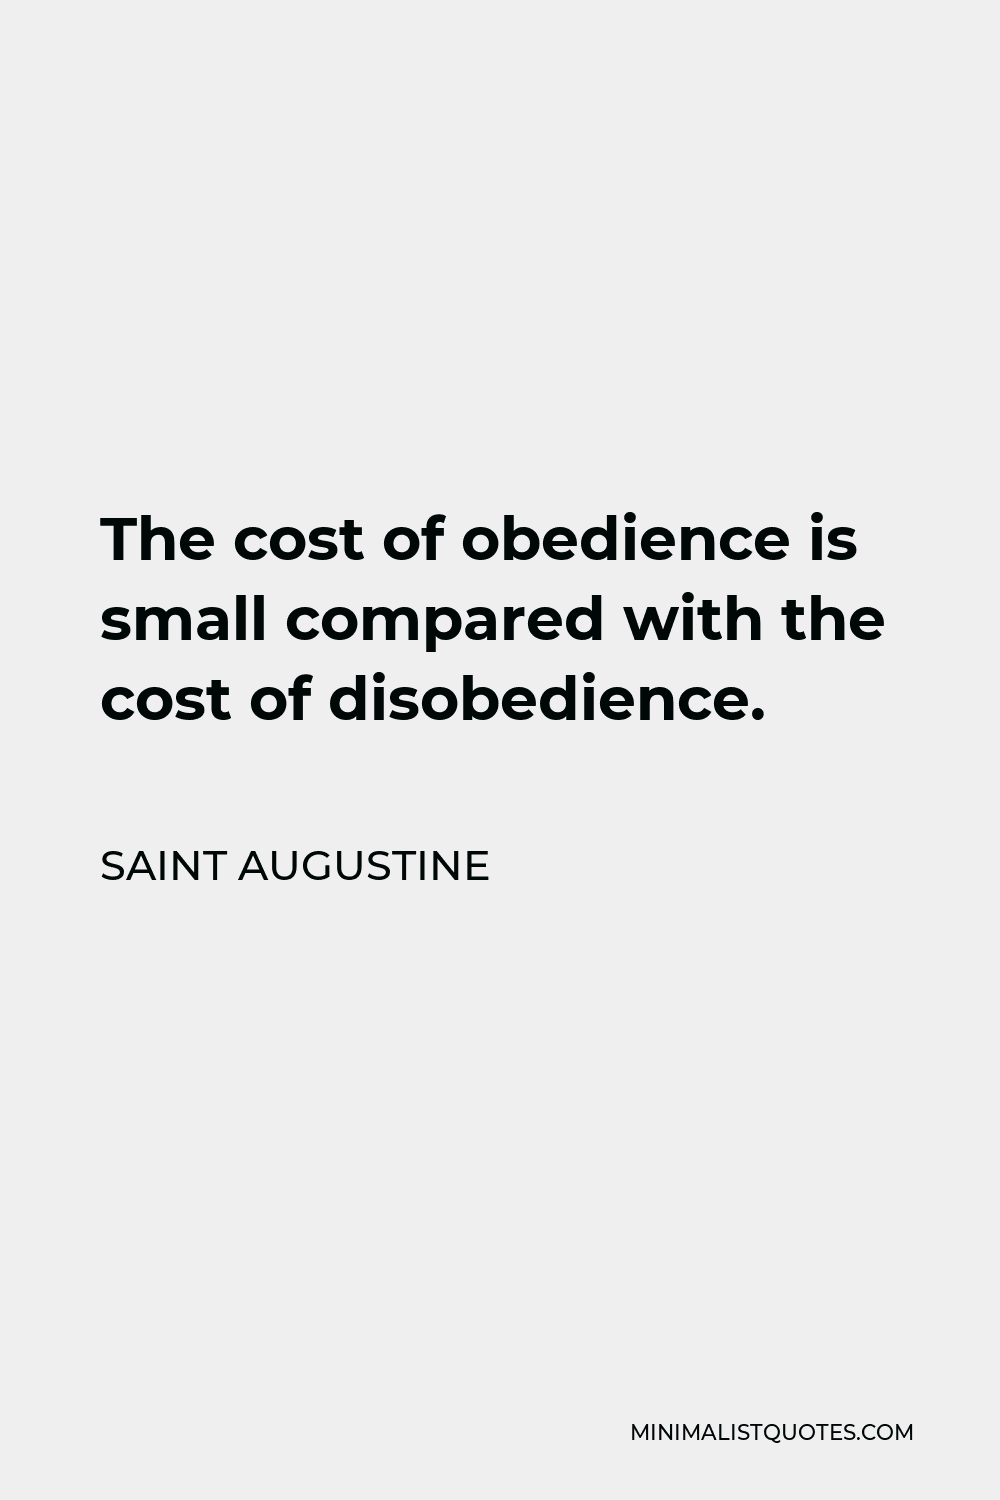 Saint Augustine Quote - The cost of obedience is small compared with the cost of disobedience.